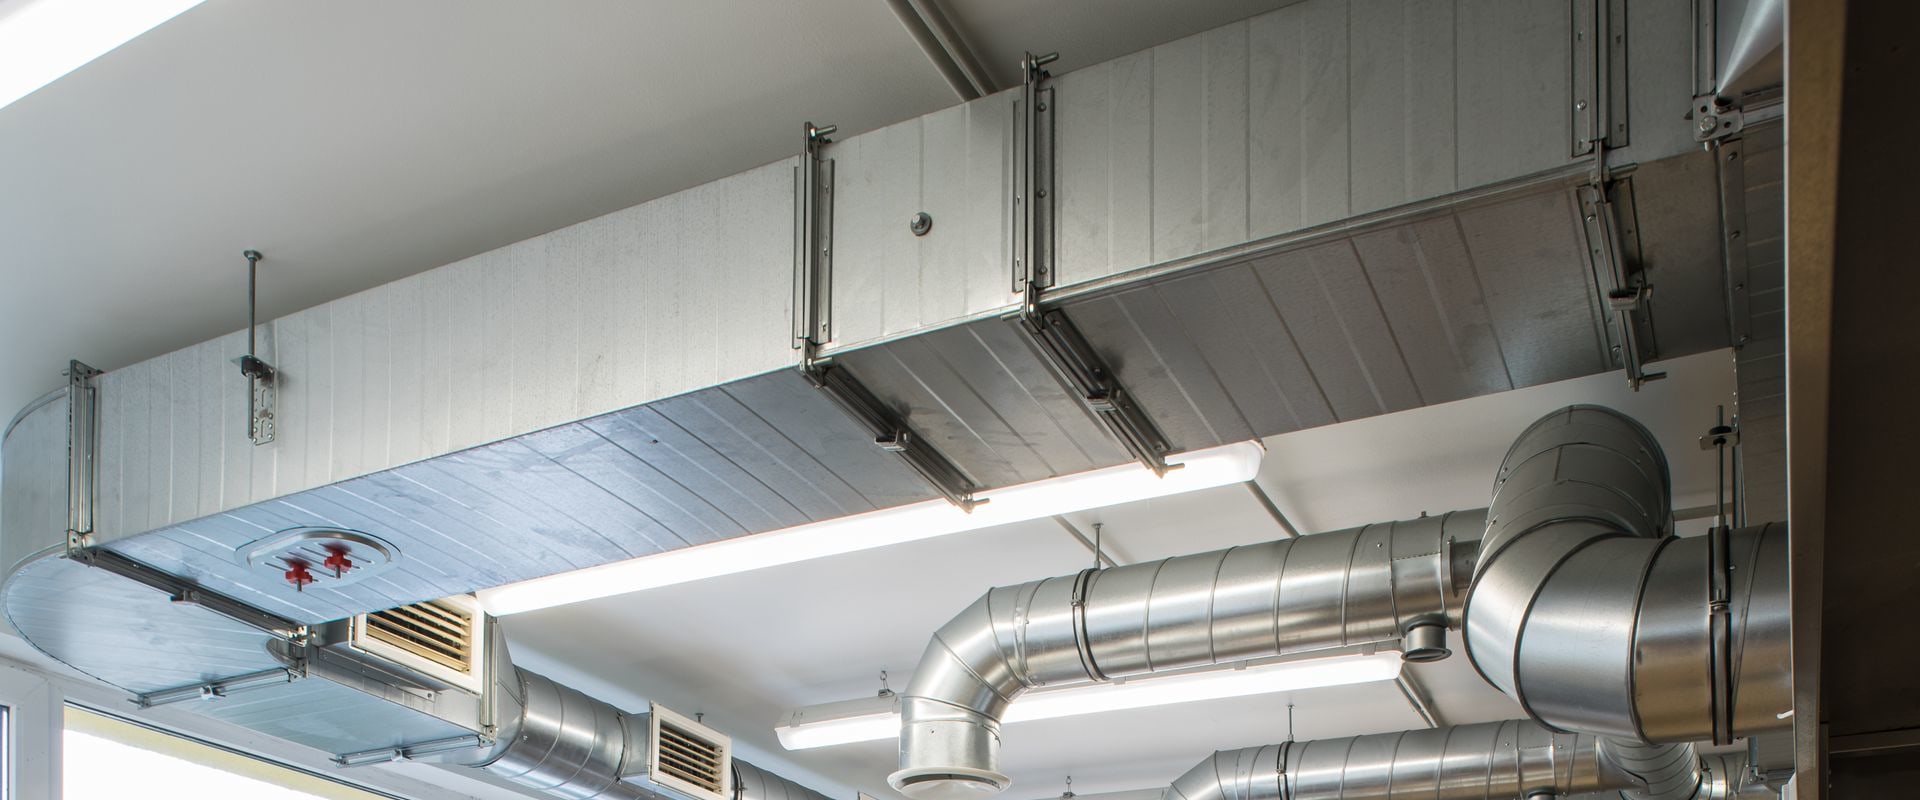 Choosing the Right Ductwork for Optimal Air Quality